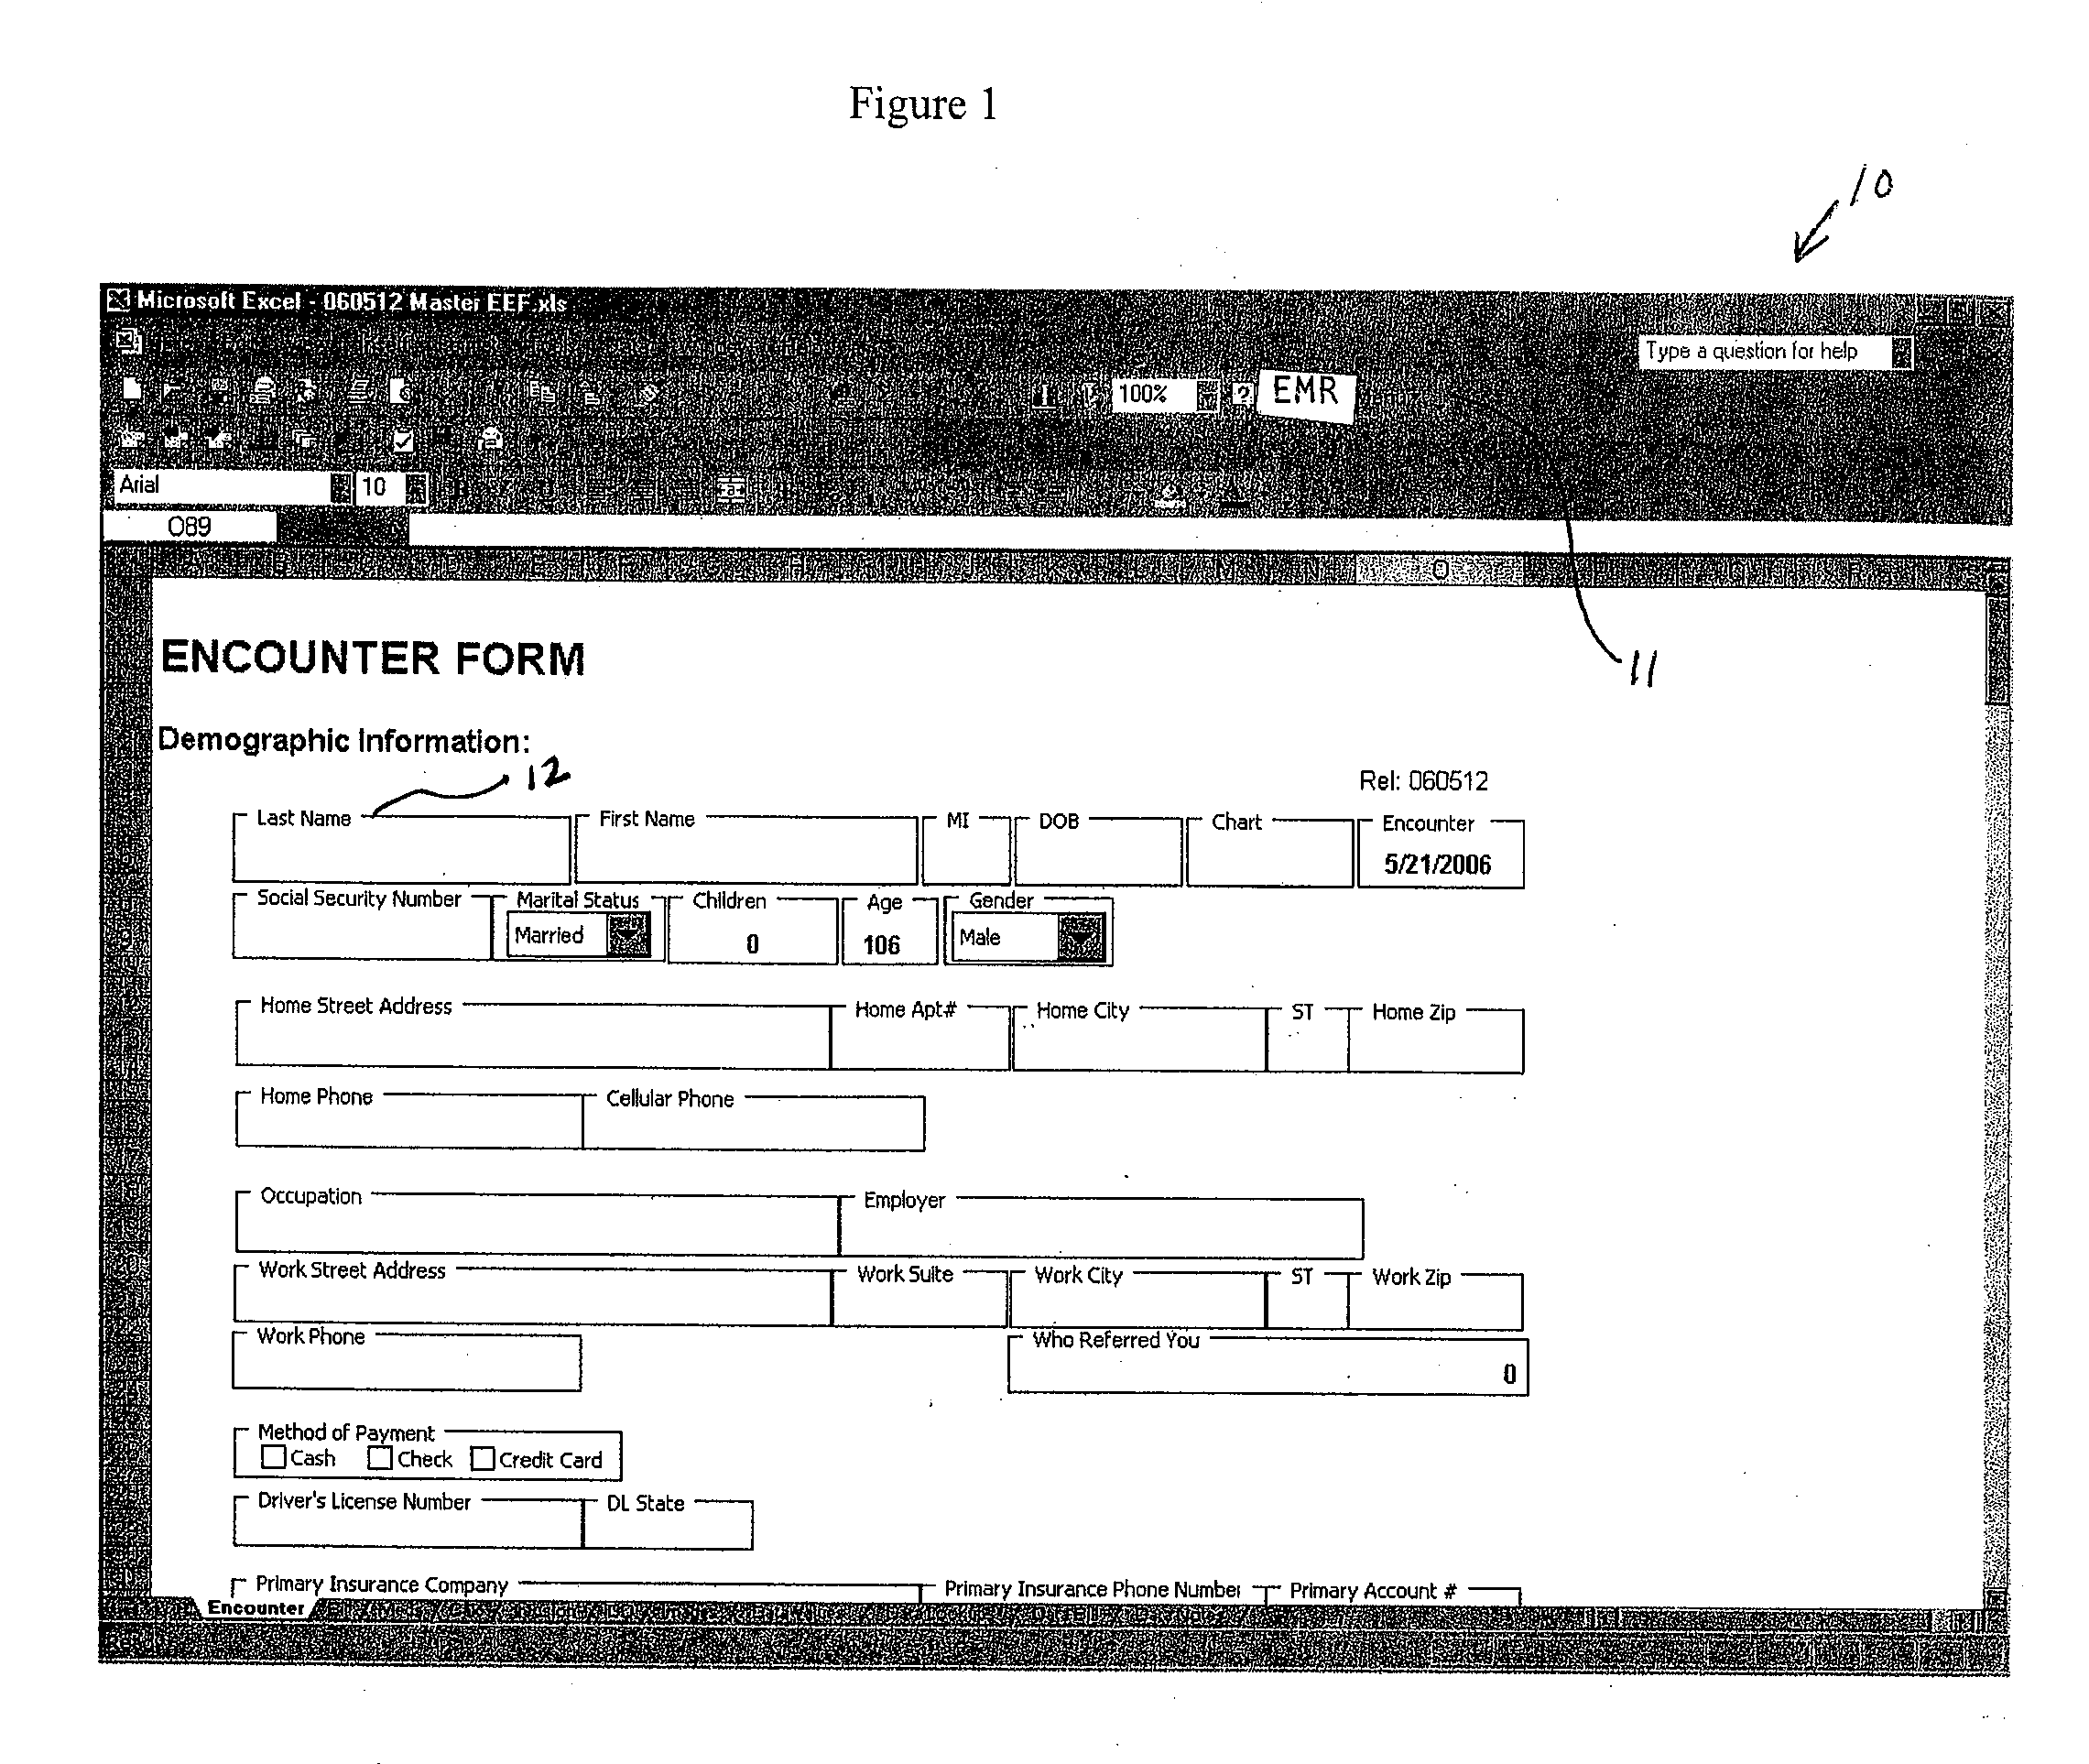 Adaptable Electronic Medical Record System and Method